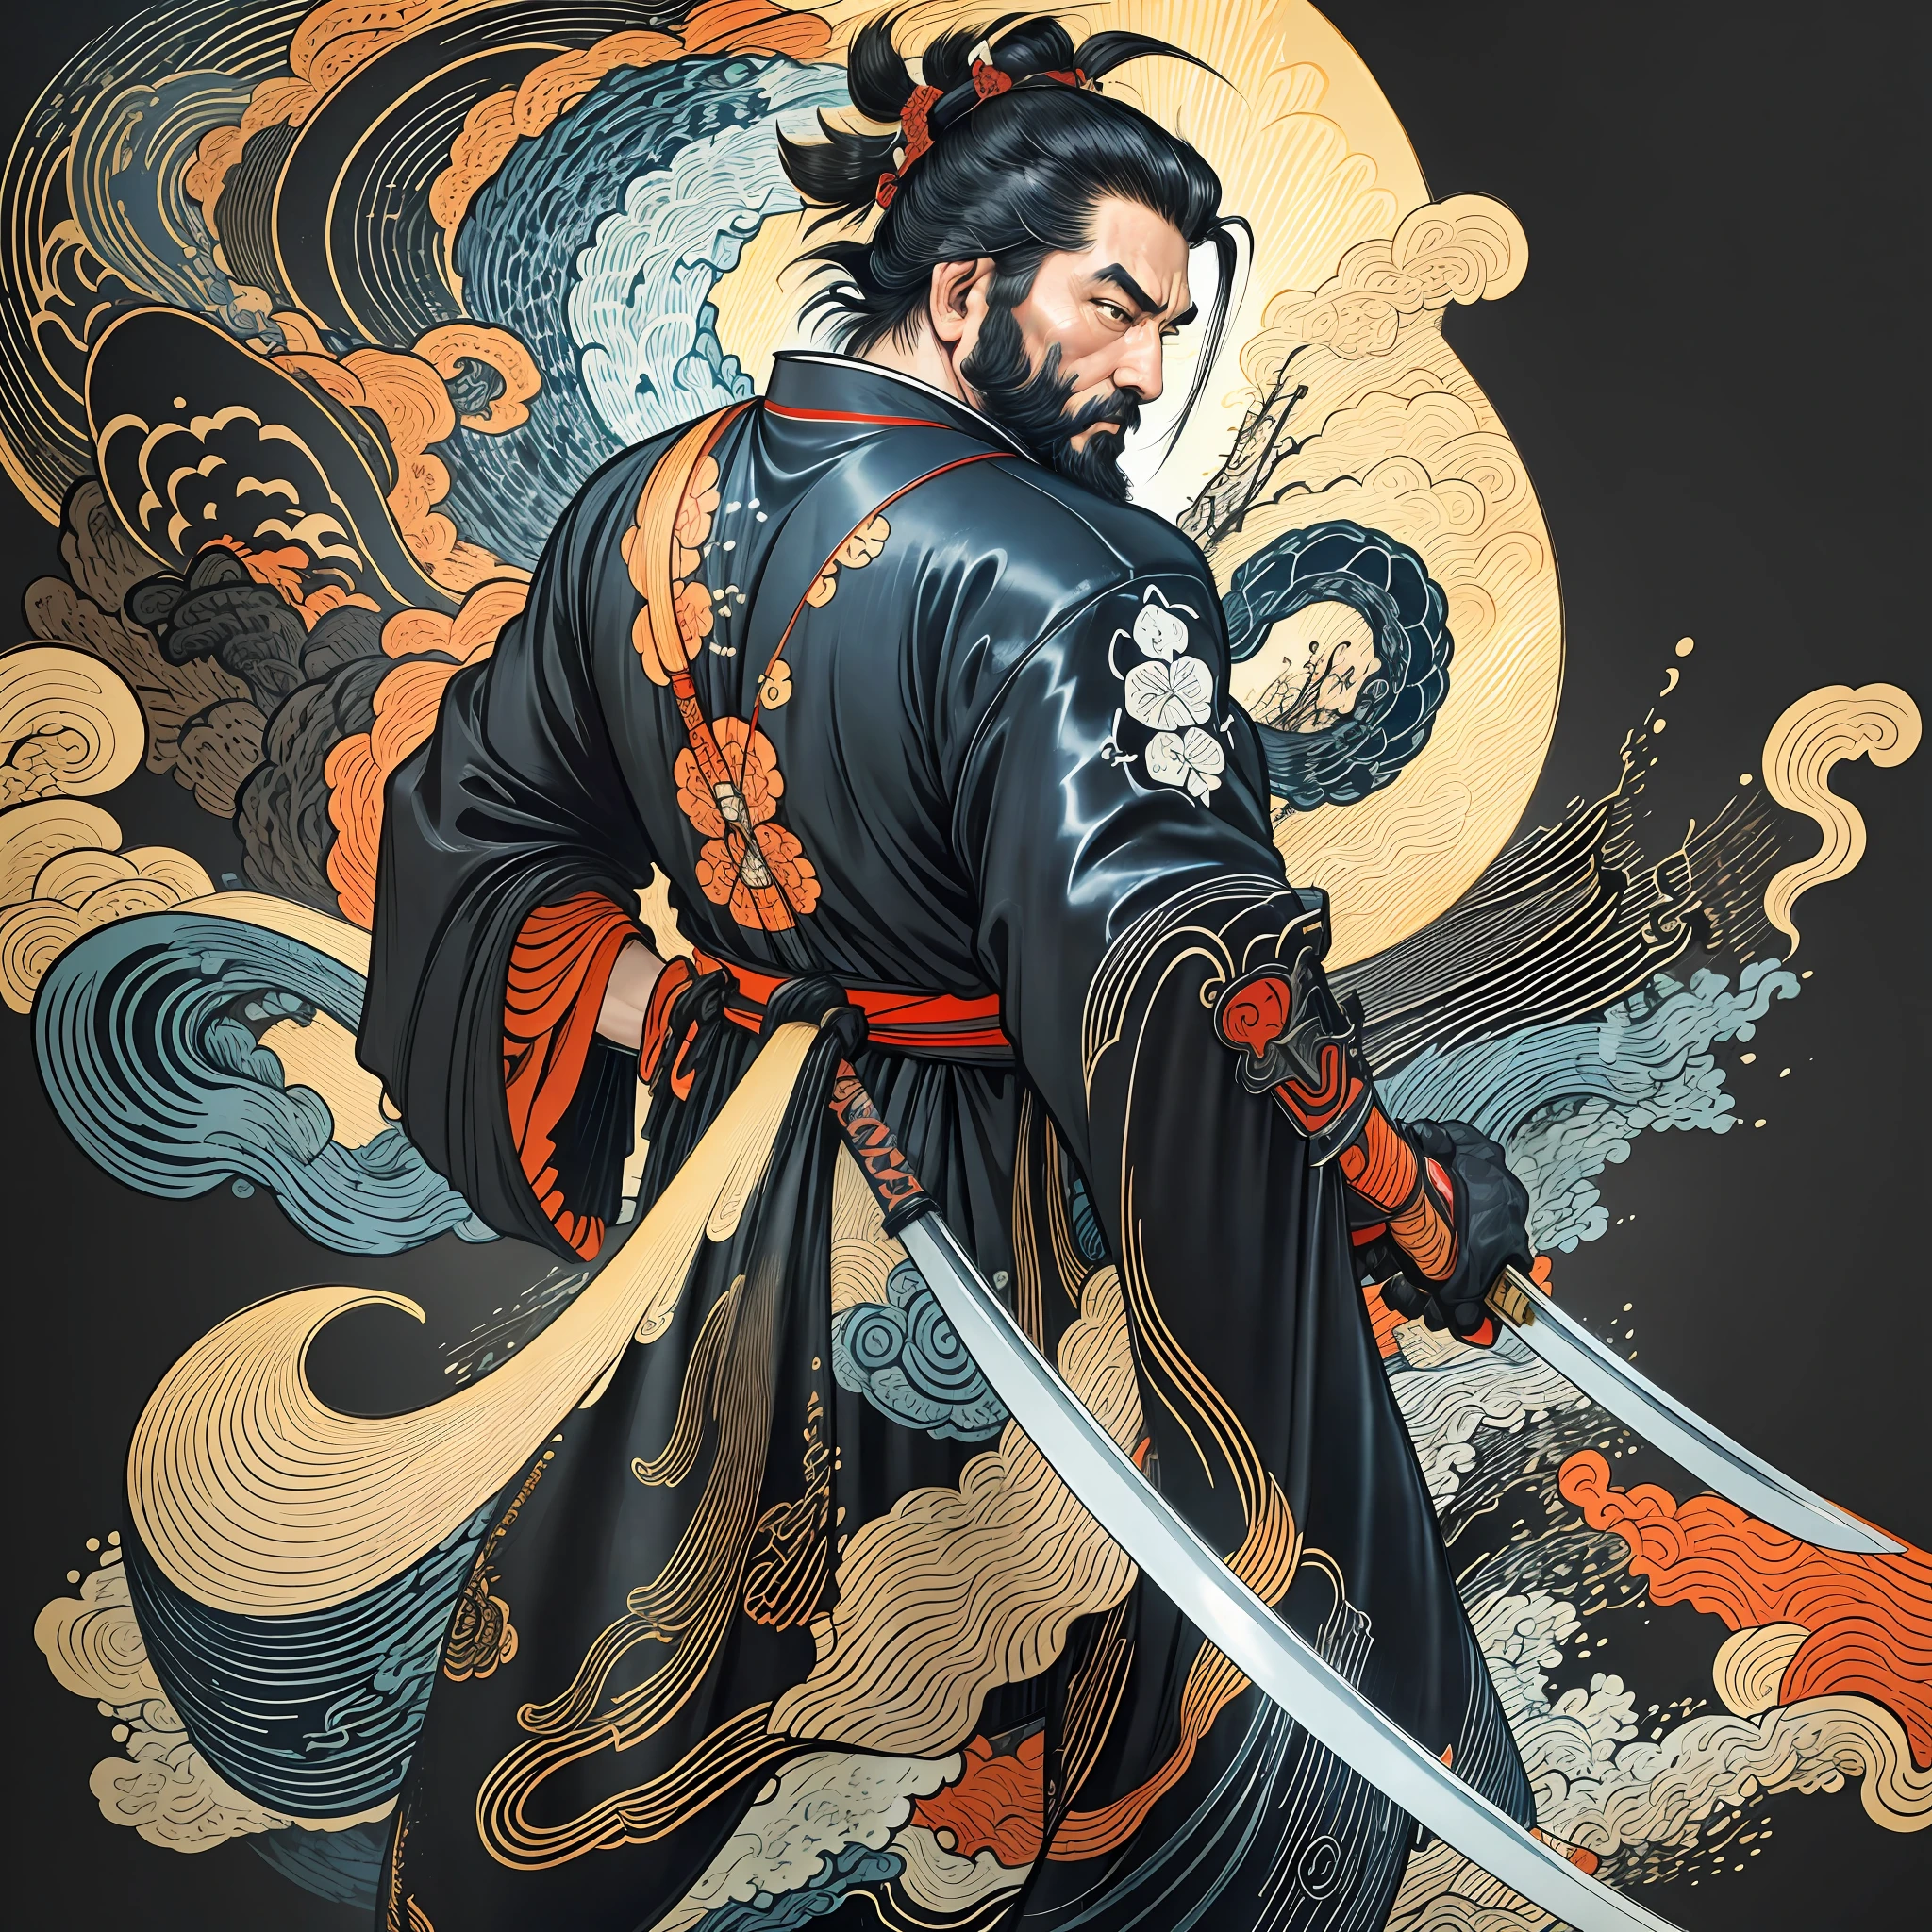 It is a full-body painting with natural colors with Katsushika Hokusai-style line drawings. The swordsman Miyamoto Musashi has a big body like a strongman. Samurai of Japan. He has a dignified yet manly expression of determination, short black hair, and a short, trimmed beard. His upper body is covered in a black kimono and his hakama is knee-long. In his right hand he holds a Japan sword. In the highest quality, in the high-resolution ukiyo-e style lightning and swirling flames of the masterpiece. Miyamoto Musashi stands with his face and body facing forward, his back straight.